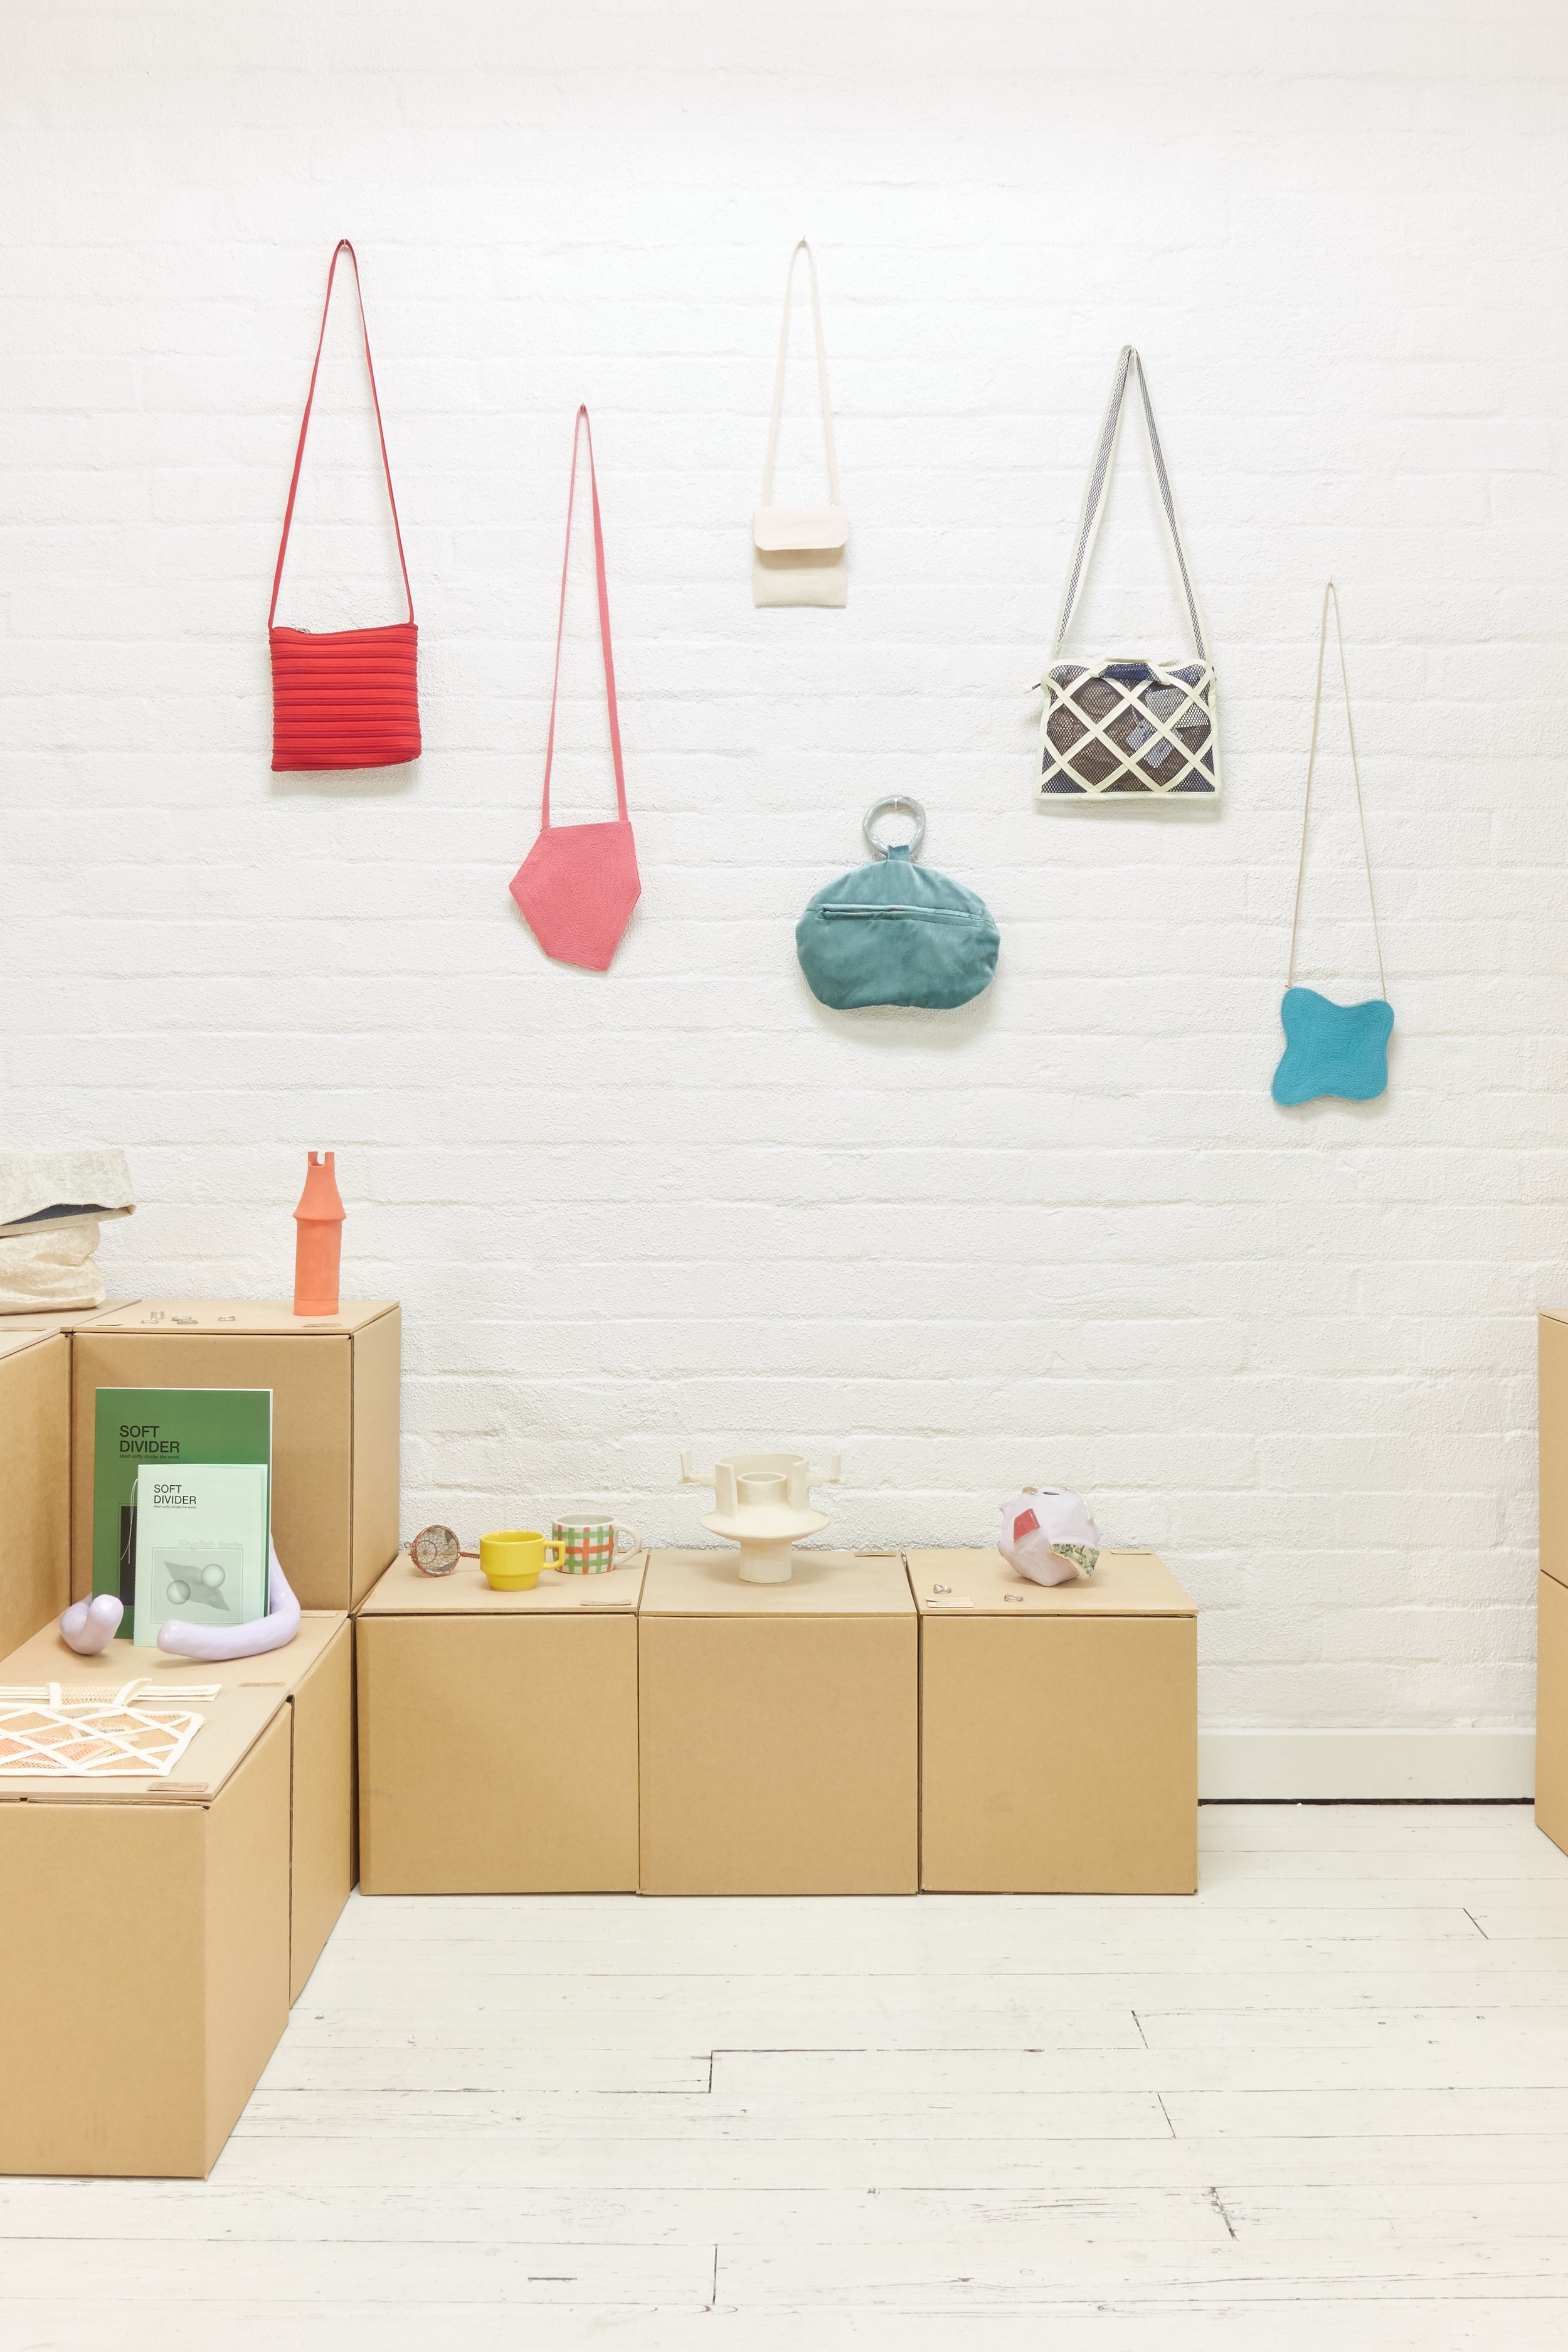 bags at a flat shop - group exhibition 309.jpg